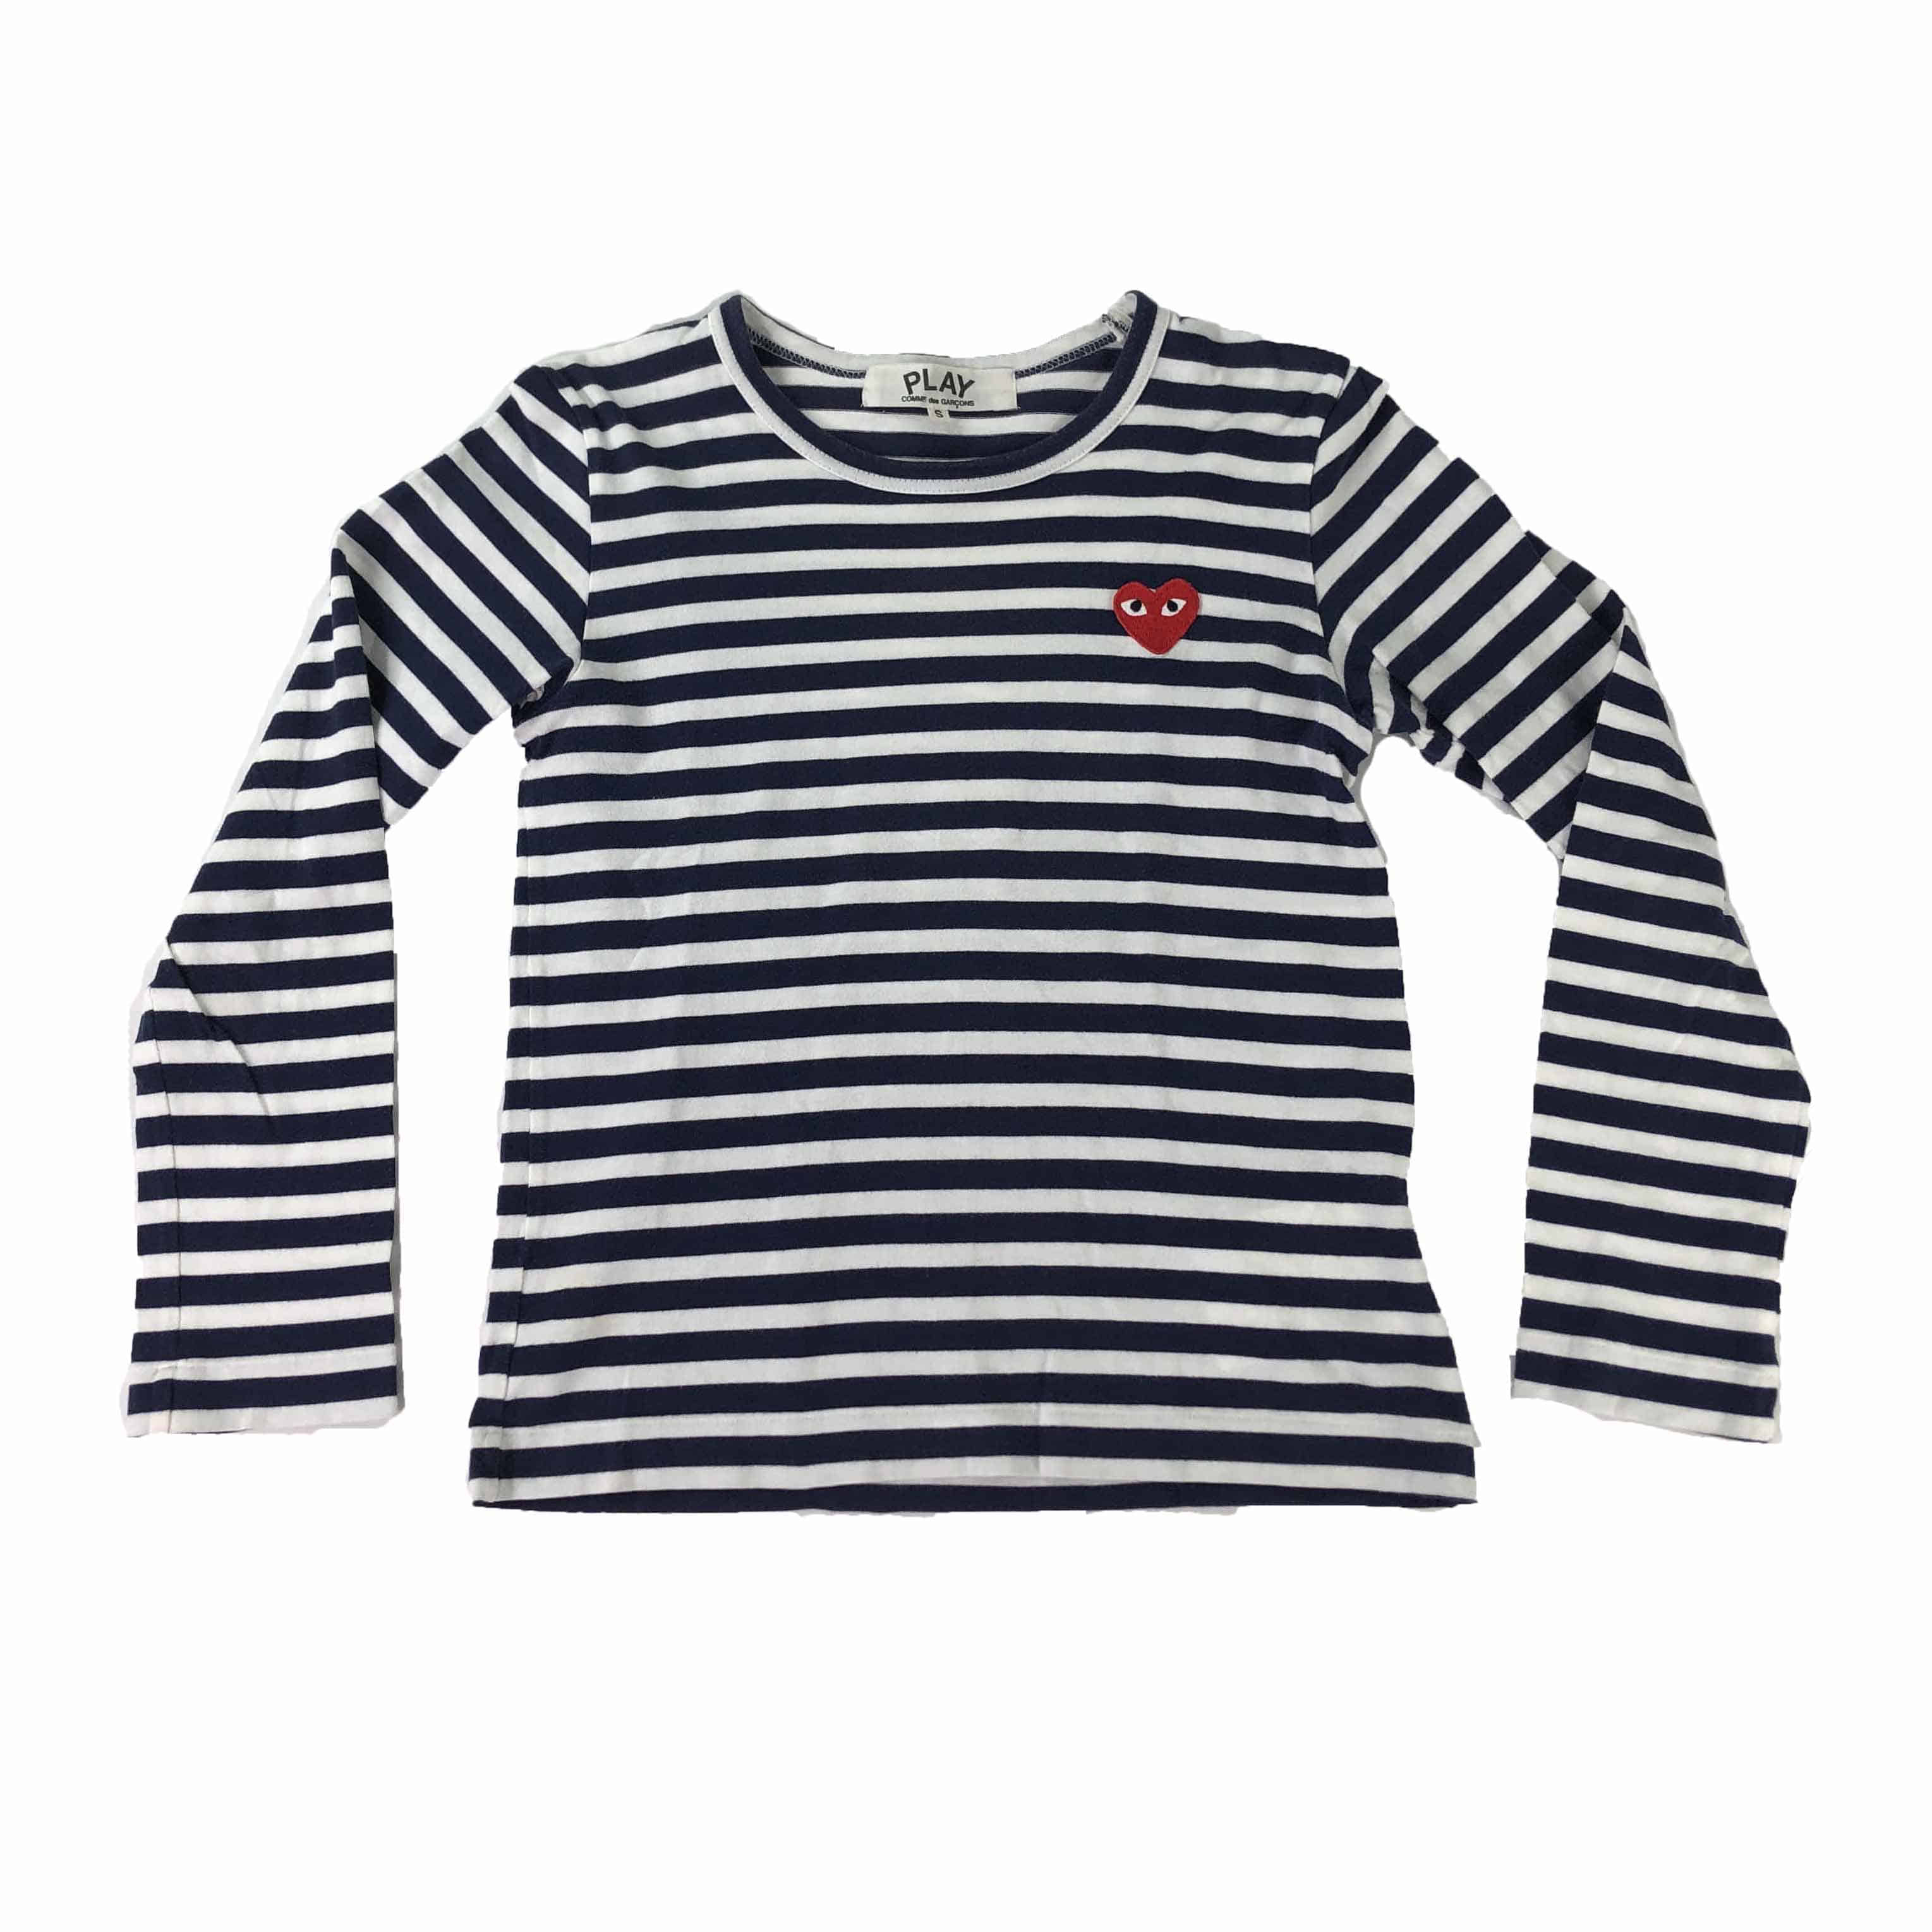 [Comme Des Garcons] PLAY Navy Stripe Longsleeve - Size S